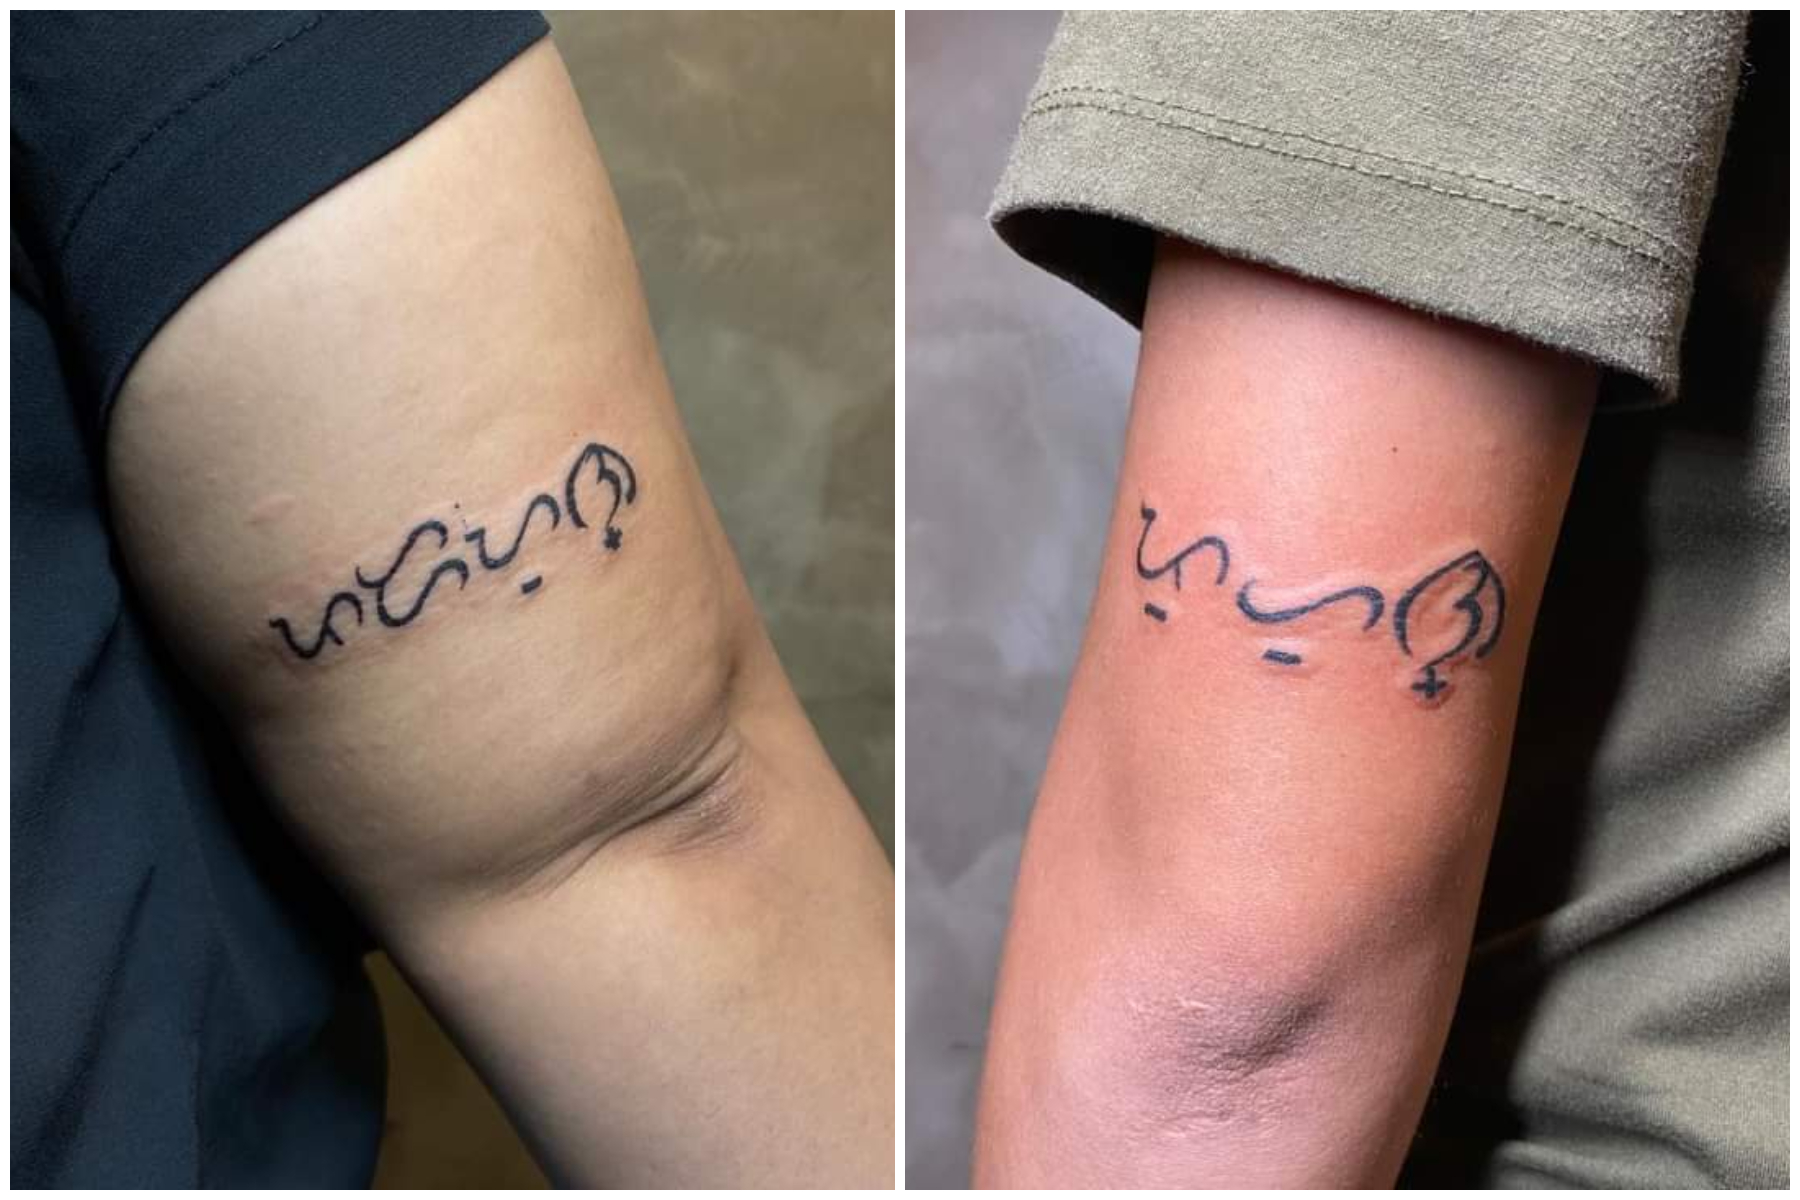 10 baybayin tattoo tattoo ideas and designs that will look awesome on you